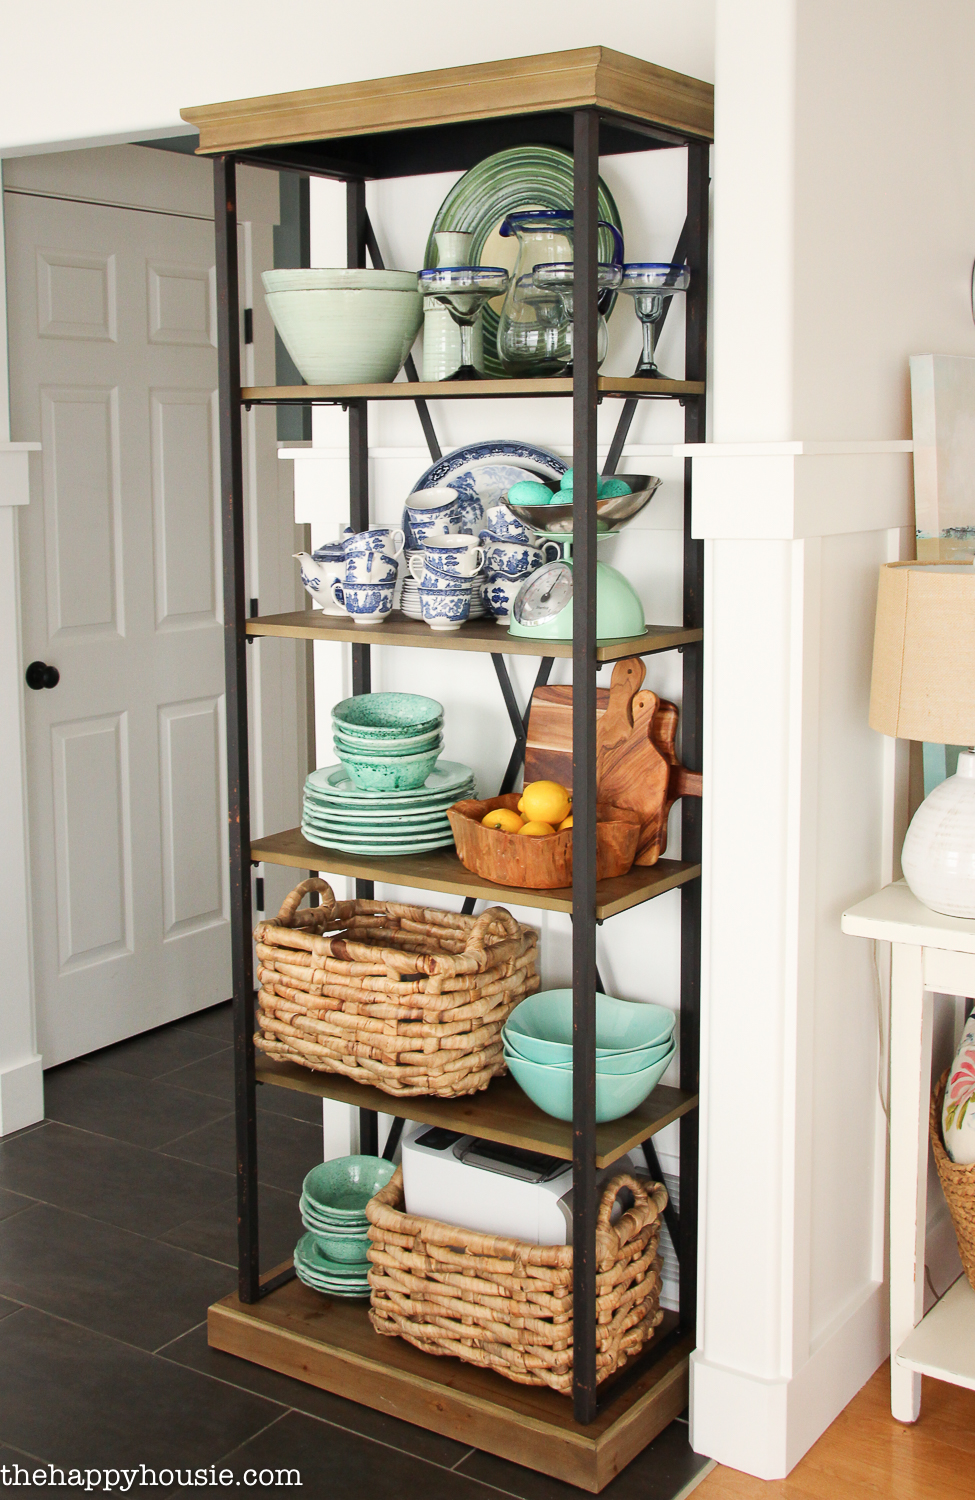 On the open shelf is tea cups, saucers, baskets and bread boards.